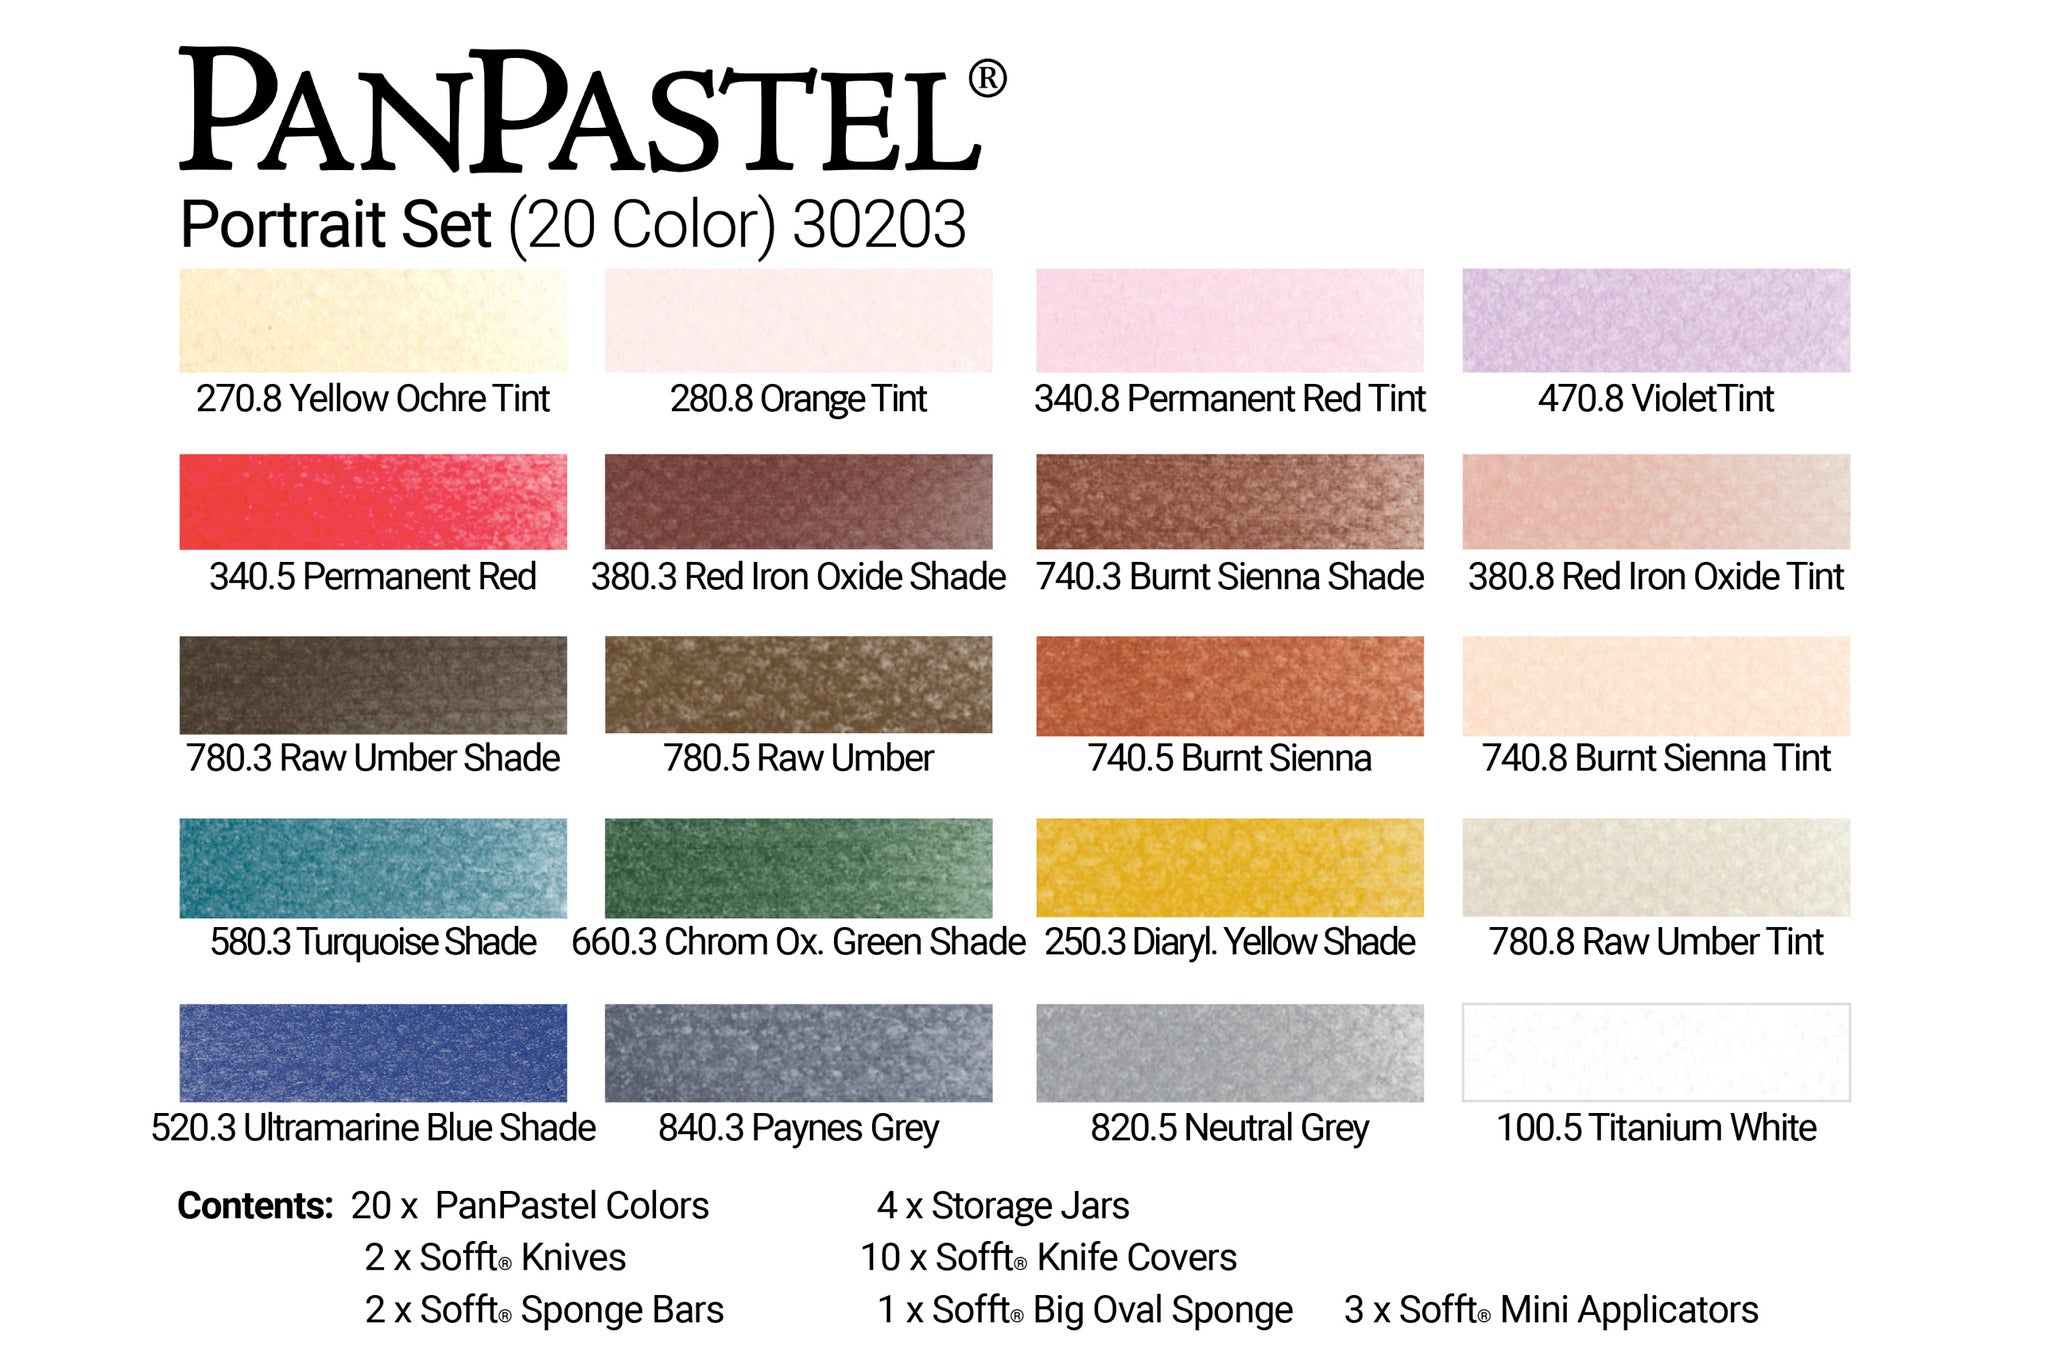 PanPastel 20 Colour Set Portrait. The PanPastel portrait set offers a beautiful selection of colour tones for any portrait artist, with on trend colours for undertones and backgrounds as well. This comprehensive set also includes a good selection of Sofft application and blending tools. 